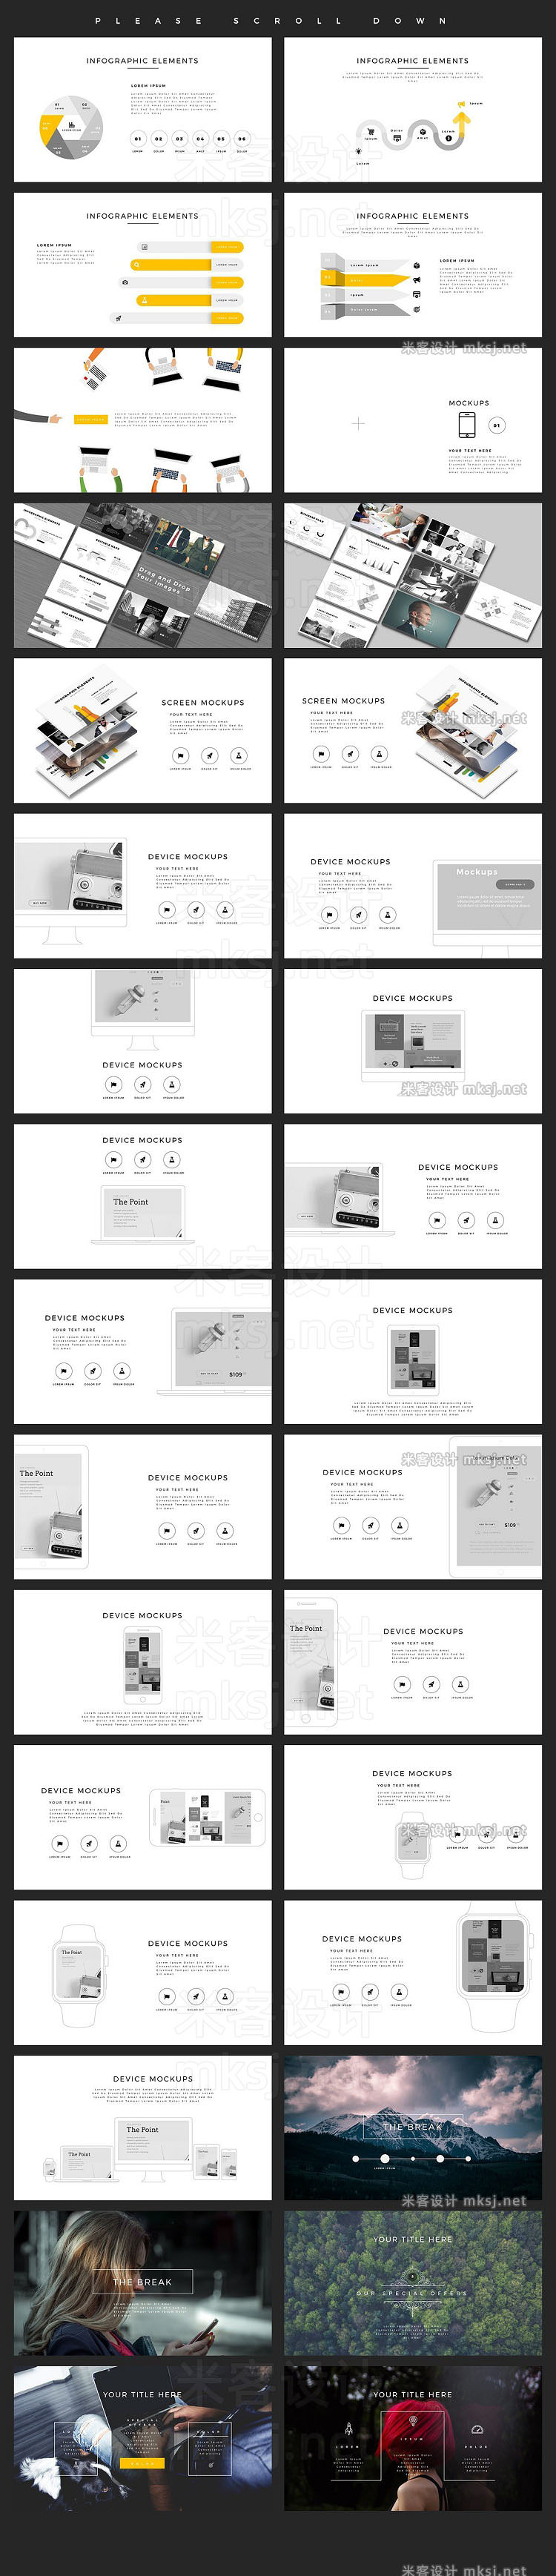 PPT模板 LEVEL PowerPoint Template